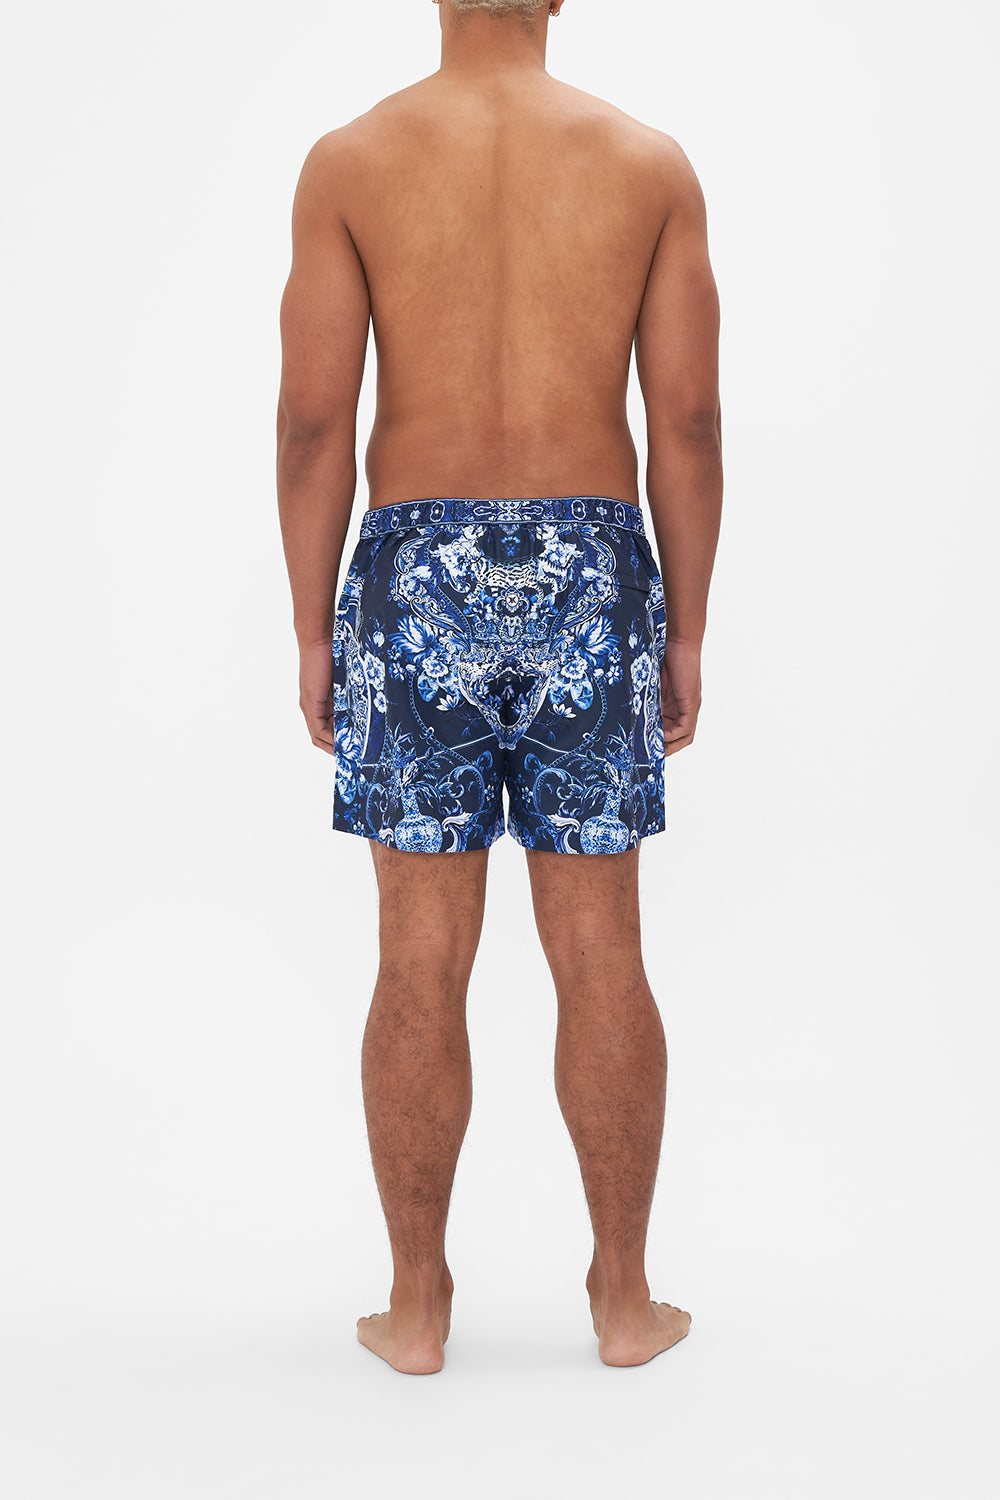 Back view of model wearing Hotel Franks By CAMILLA mens blue swim shorts in Delft Dynasty print